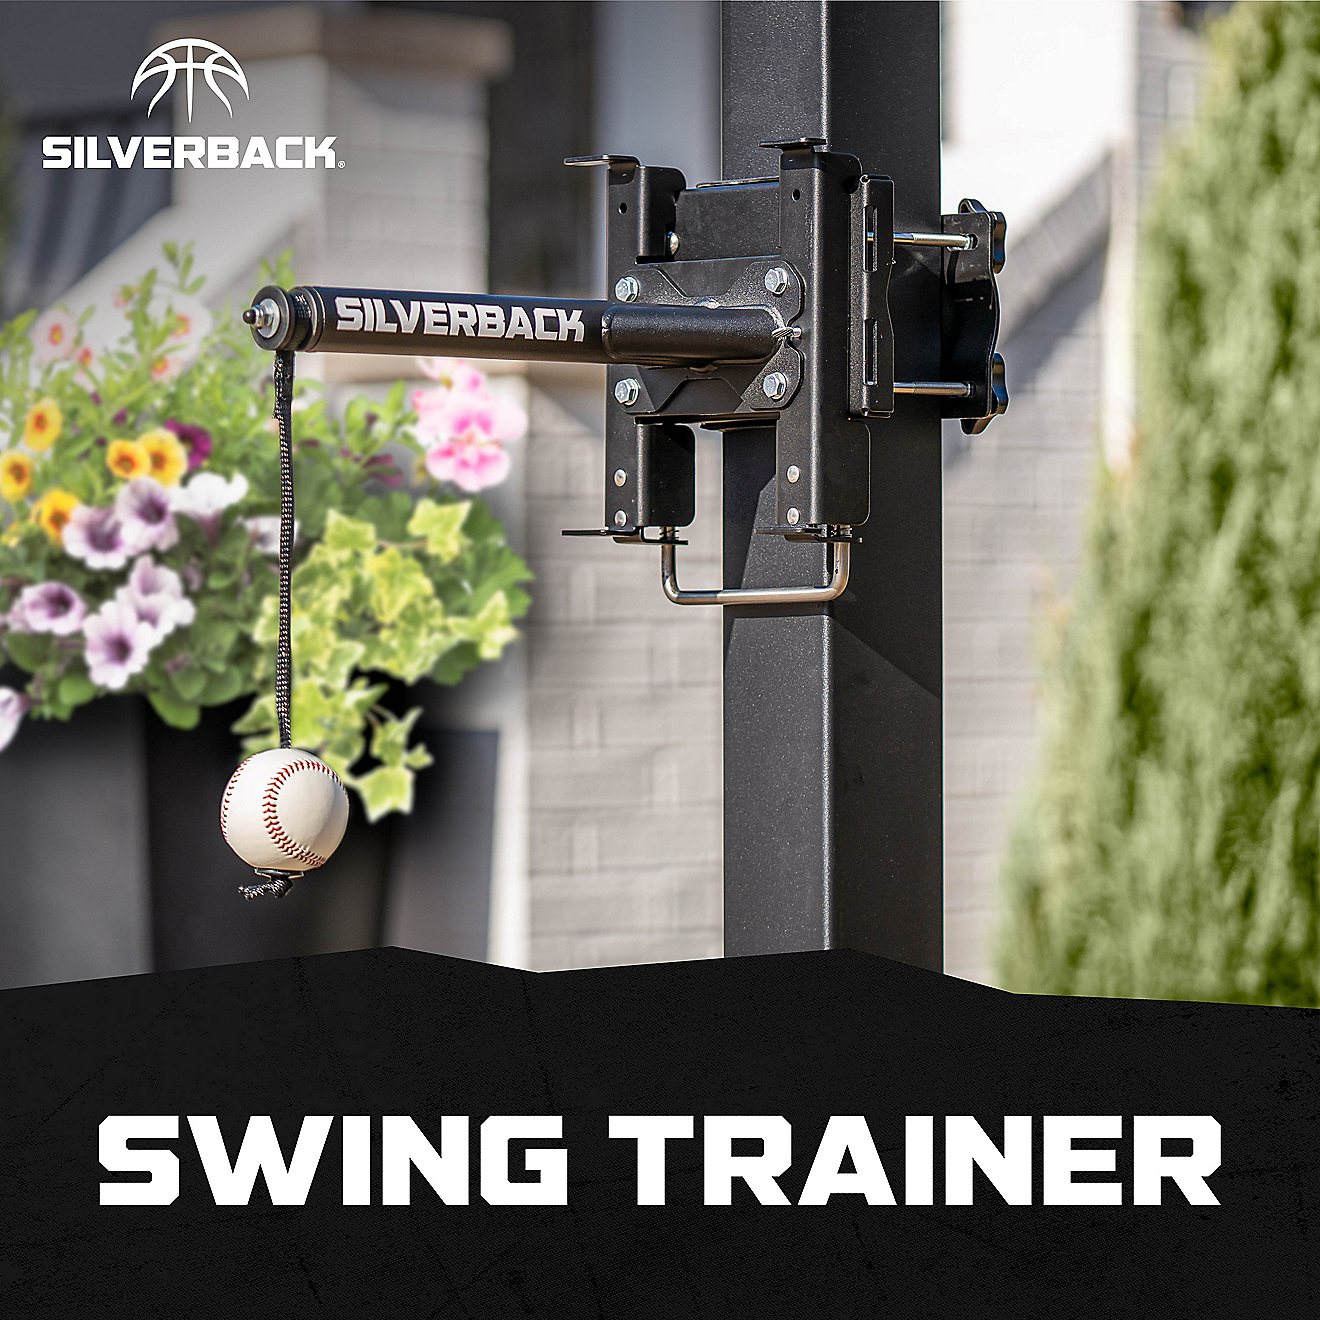 Escalade Sports Silverback Portable Baseball Swing Trainer                                                                       - view number 3